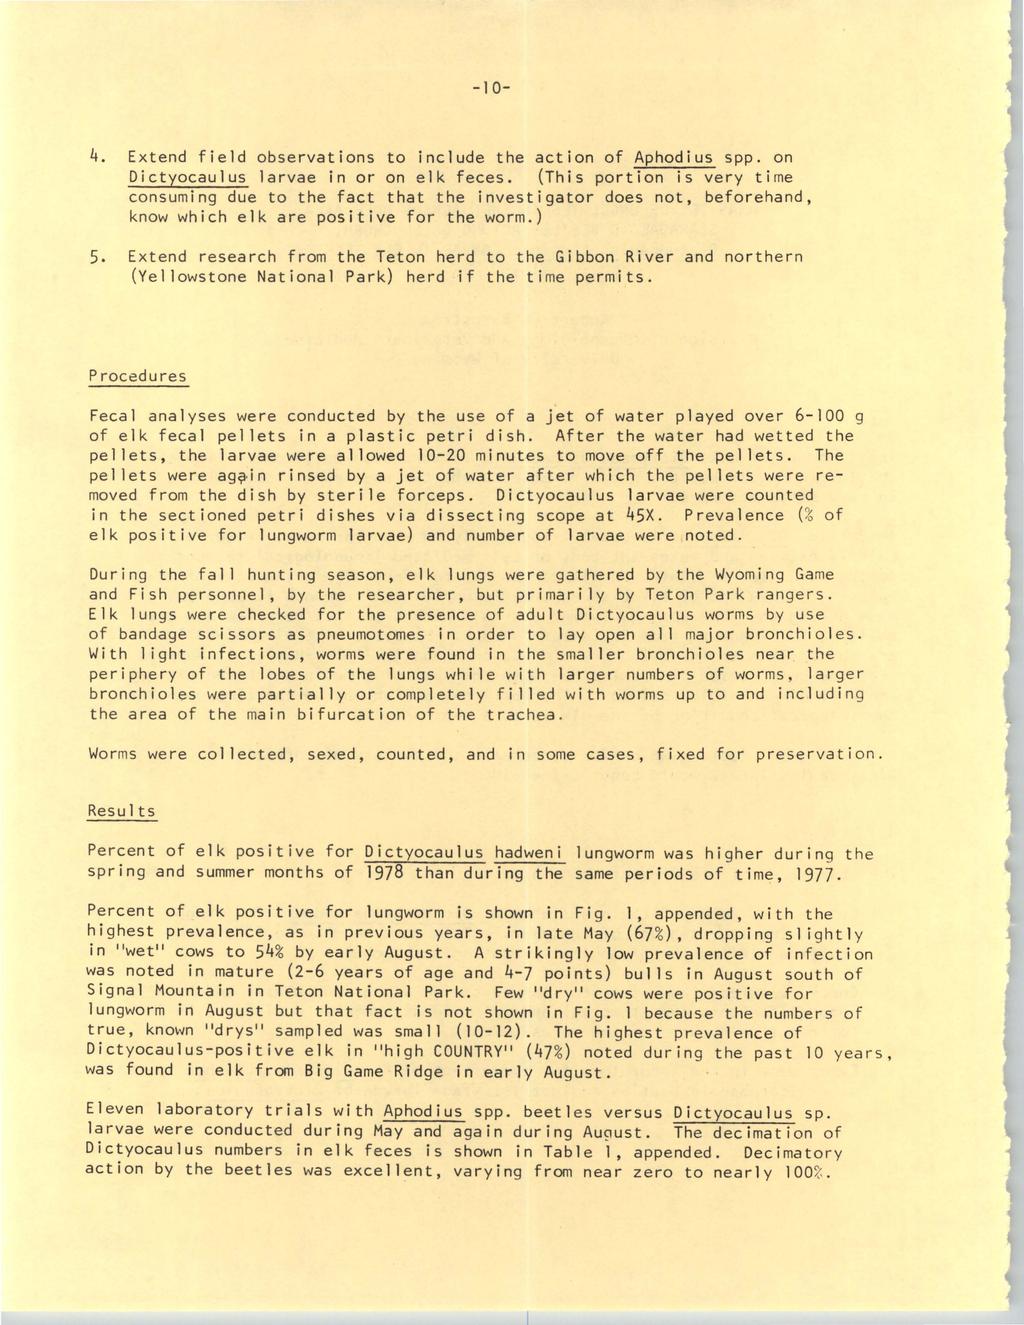 University of Wyoming National Park Service Research Center Annual Report, Vol. 2 [1978], Art. 3-10- 4. Extend field observations to include the action of Aphodius spp.